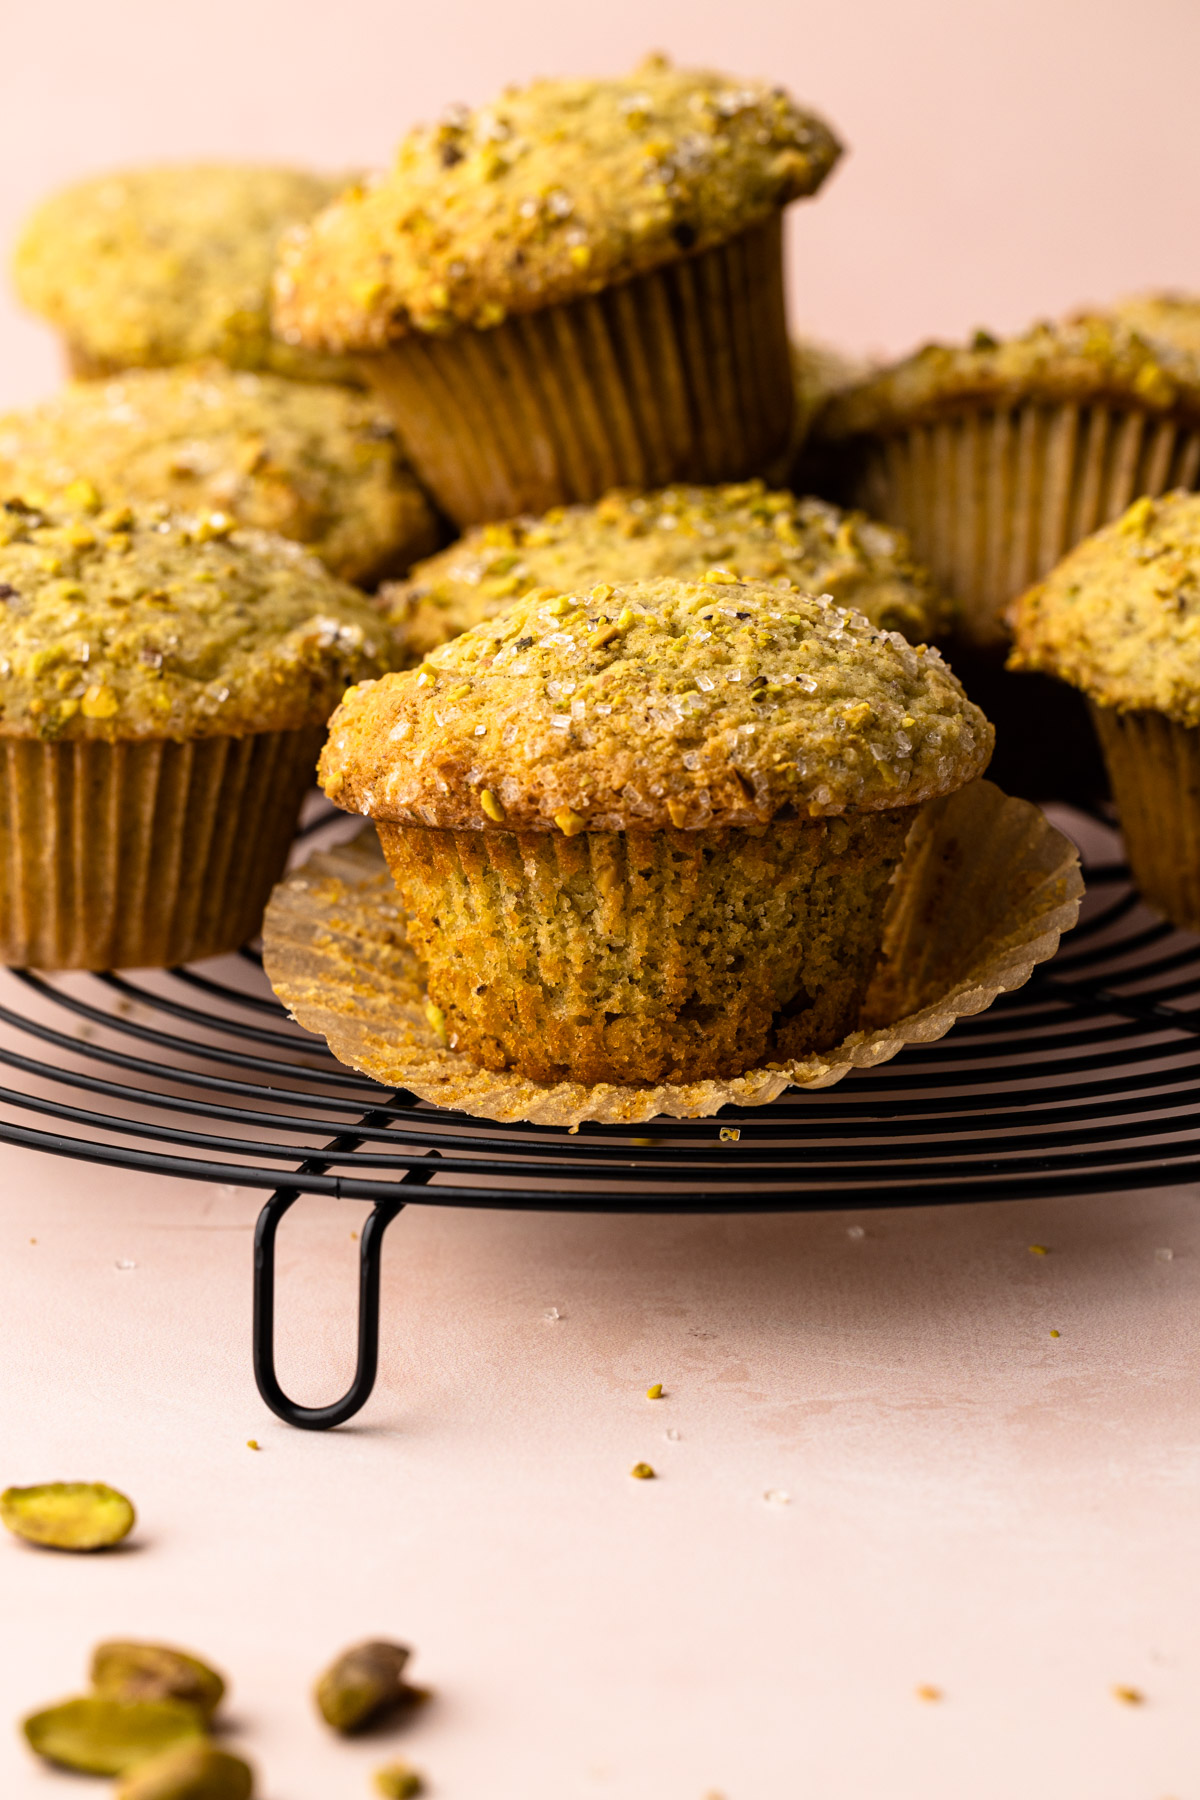 A pistachio muffin on a cooling rack.